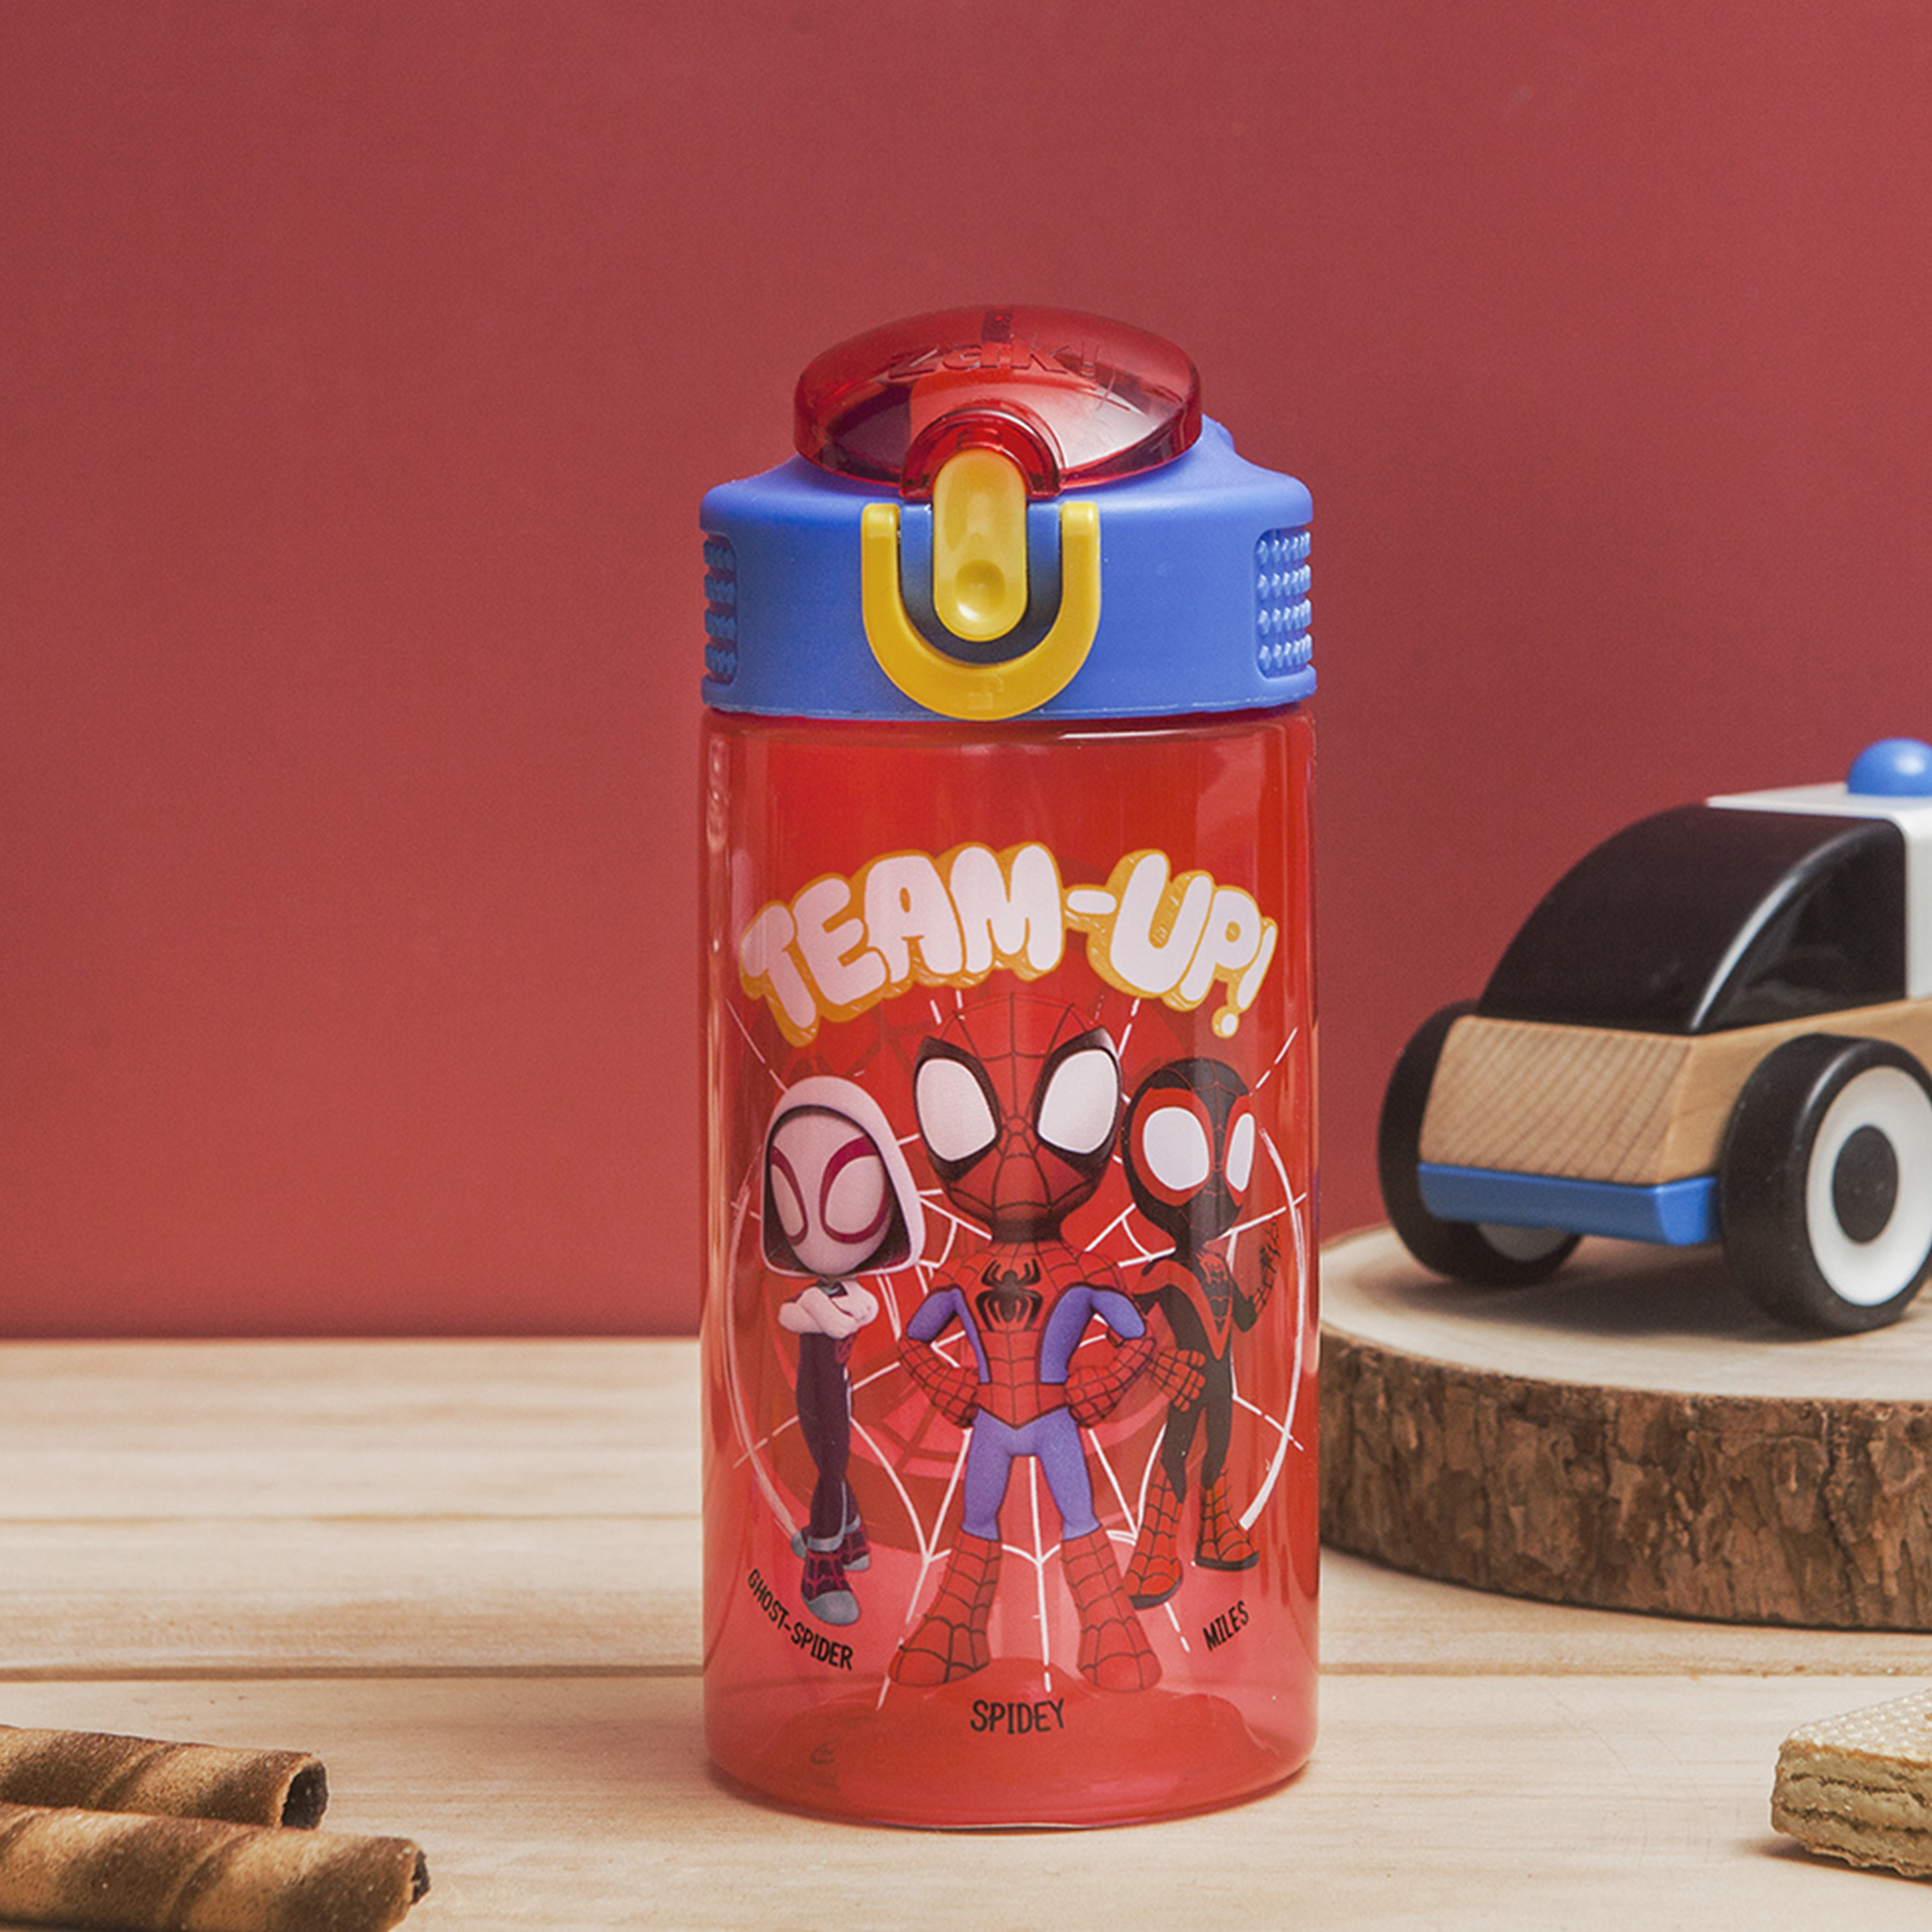 Spider-Man and His Amazing Friends 16 ounce Reusable Plastic Water Bottle with Straw, Spider-Friends, 2-piece set slideshow image 3